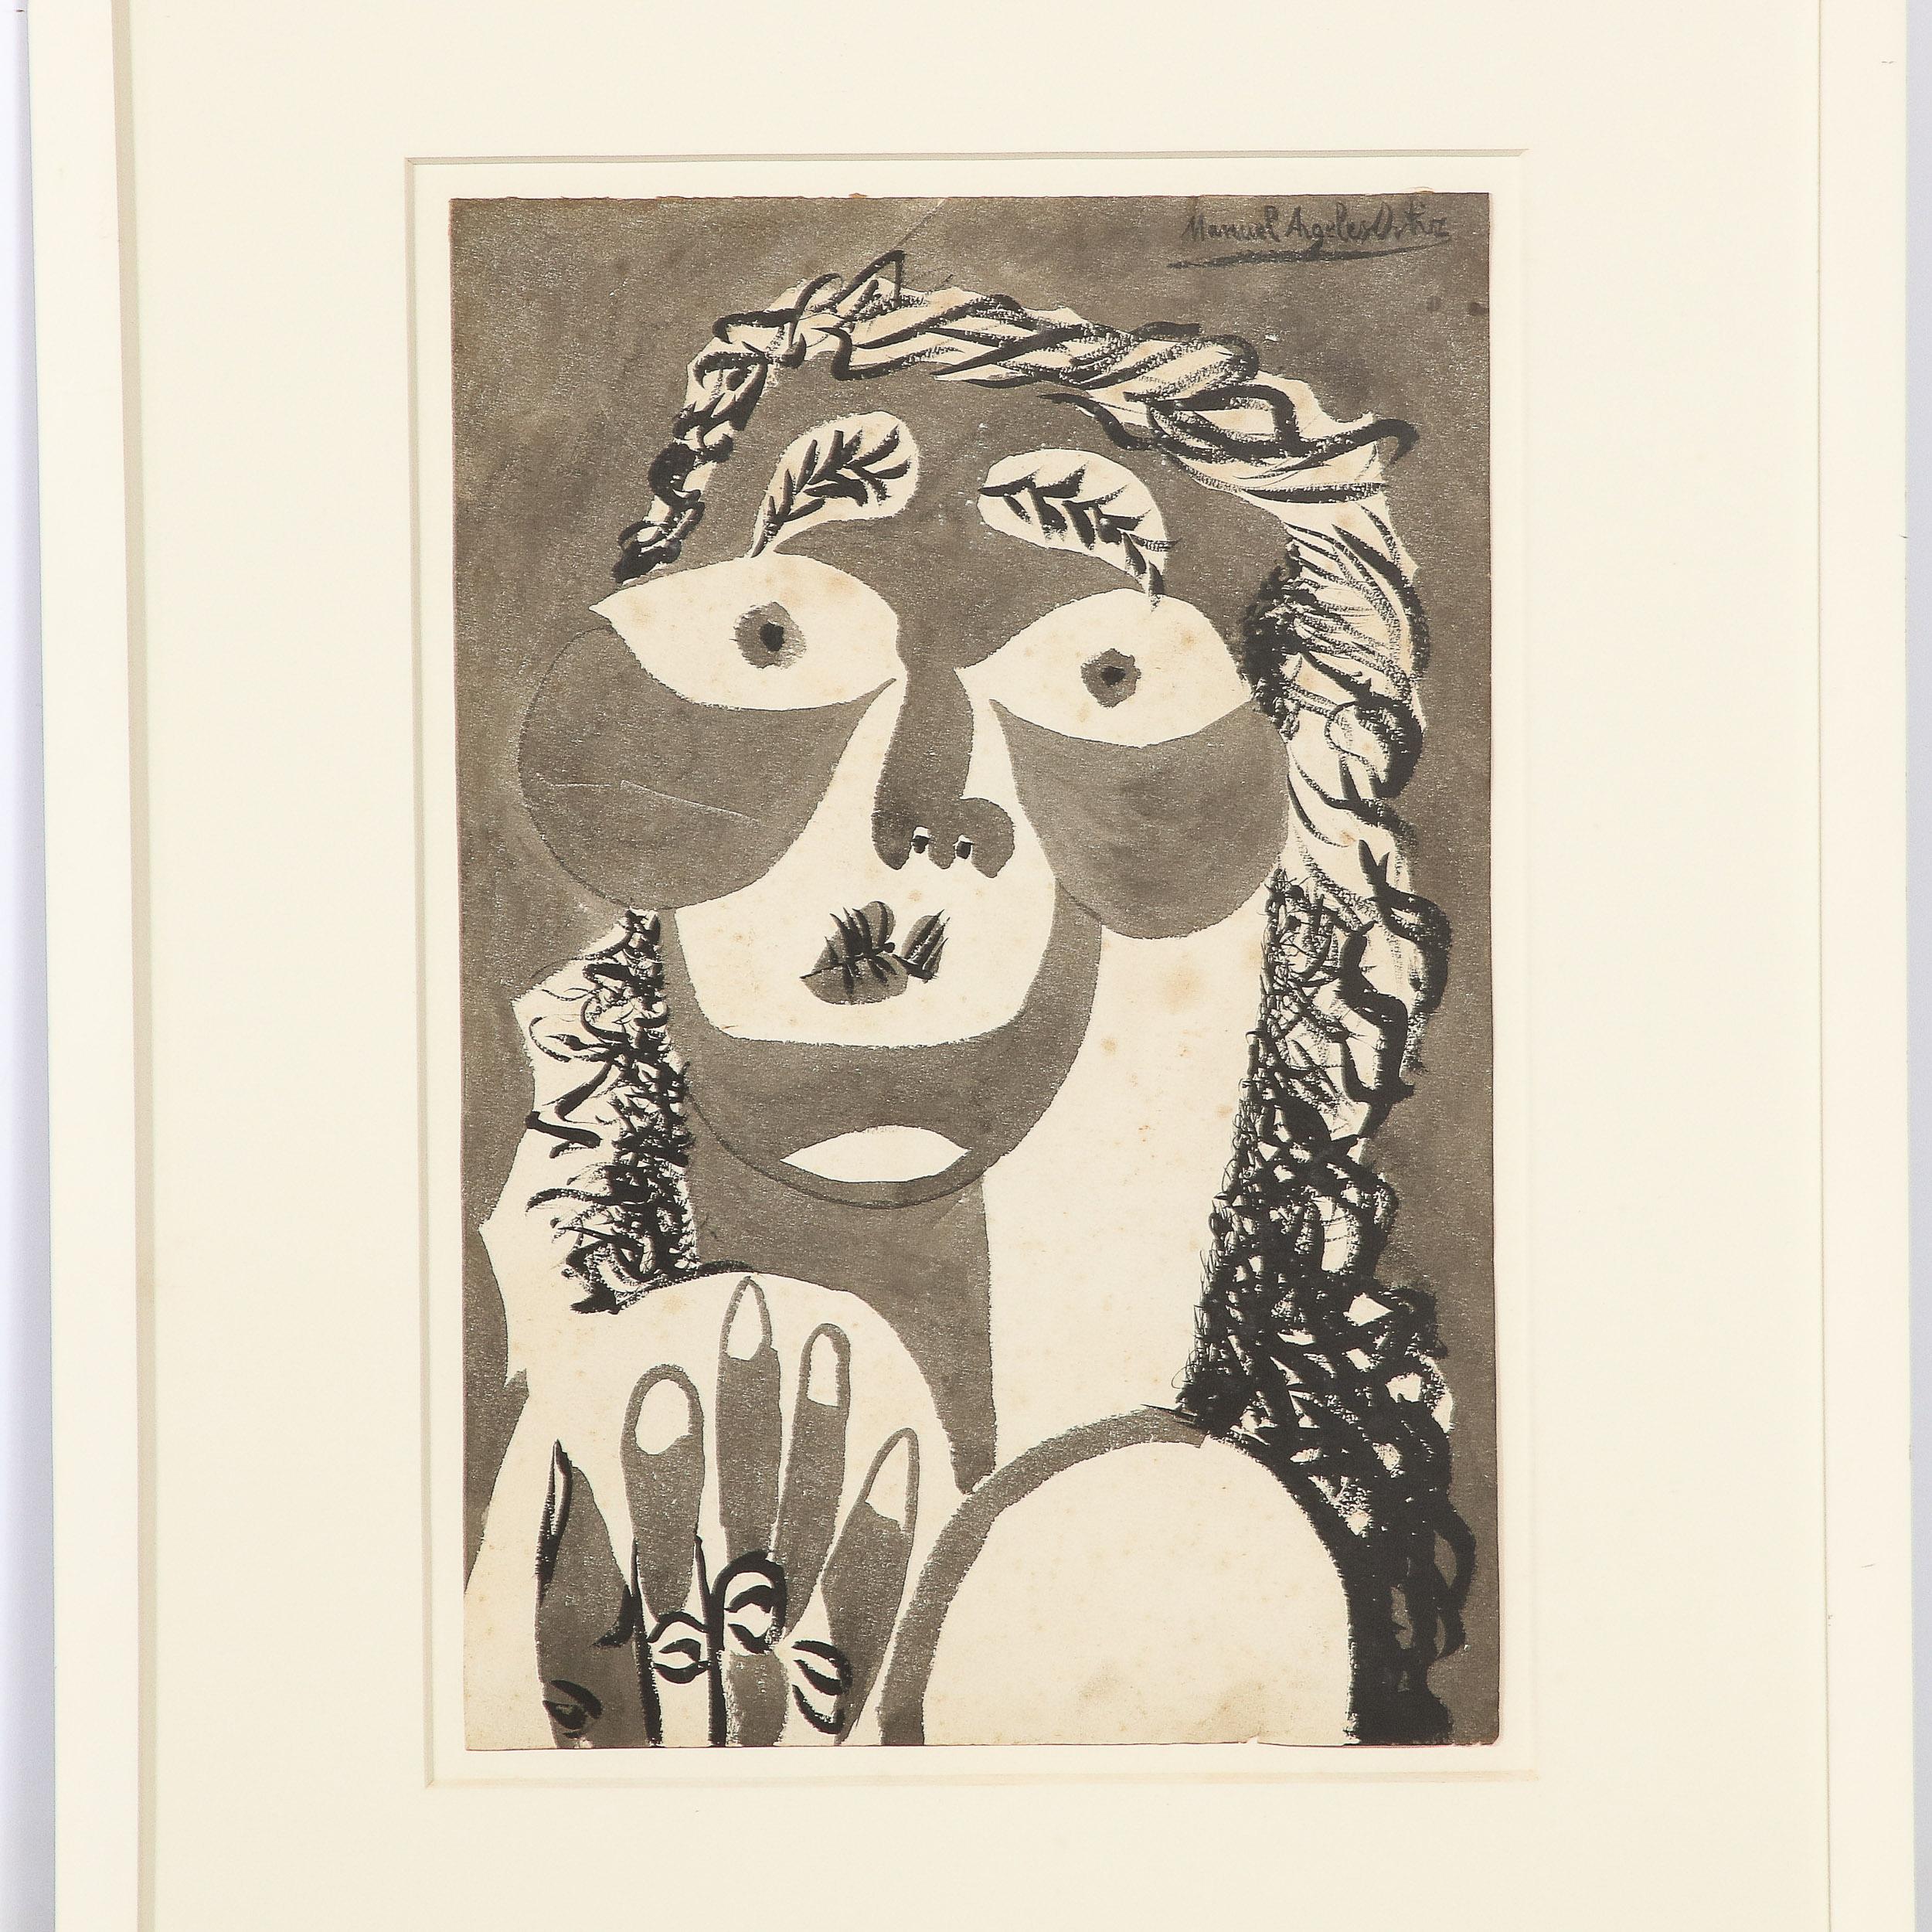 This sophisticated modernist portrait was realized by the esteemed artist Manuel Angele Ortiz in Spain, circa 1950. The work realized in a style influenced by the work of Pablo Picasso features a highly stylized and abstracted rendition of a woman's